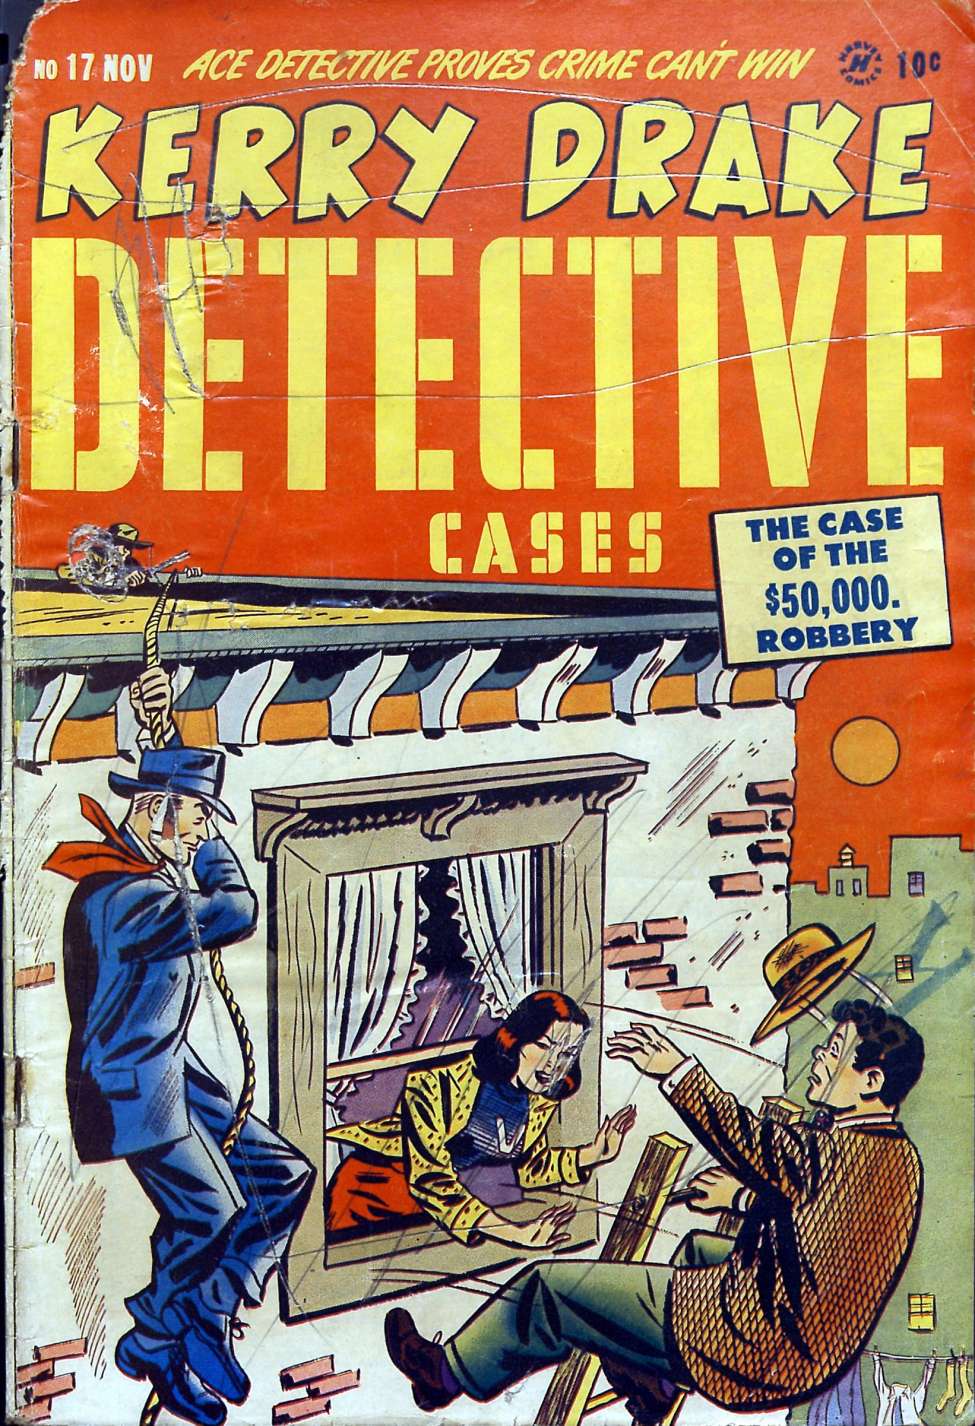 Book Cover For Kerry Drake Detective Cases 17